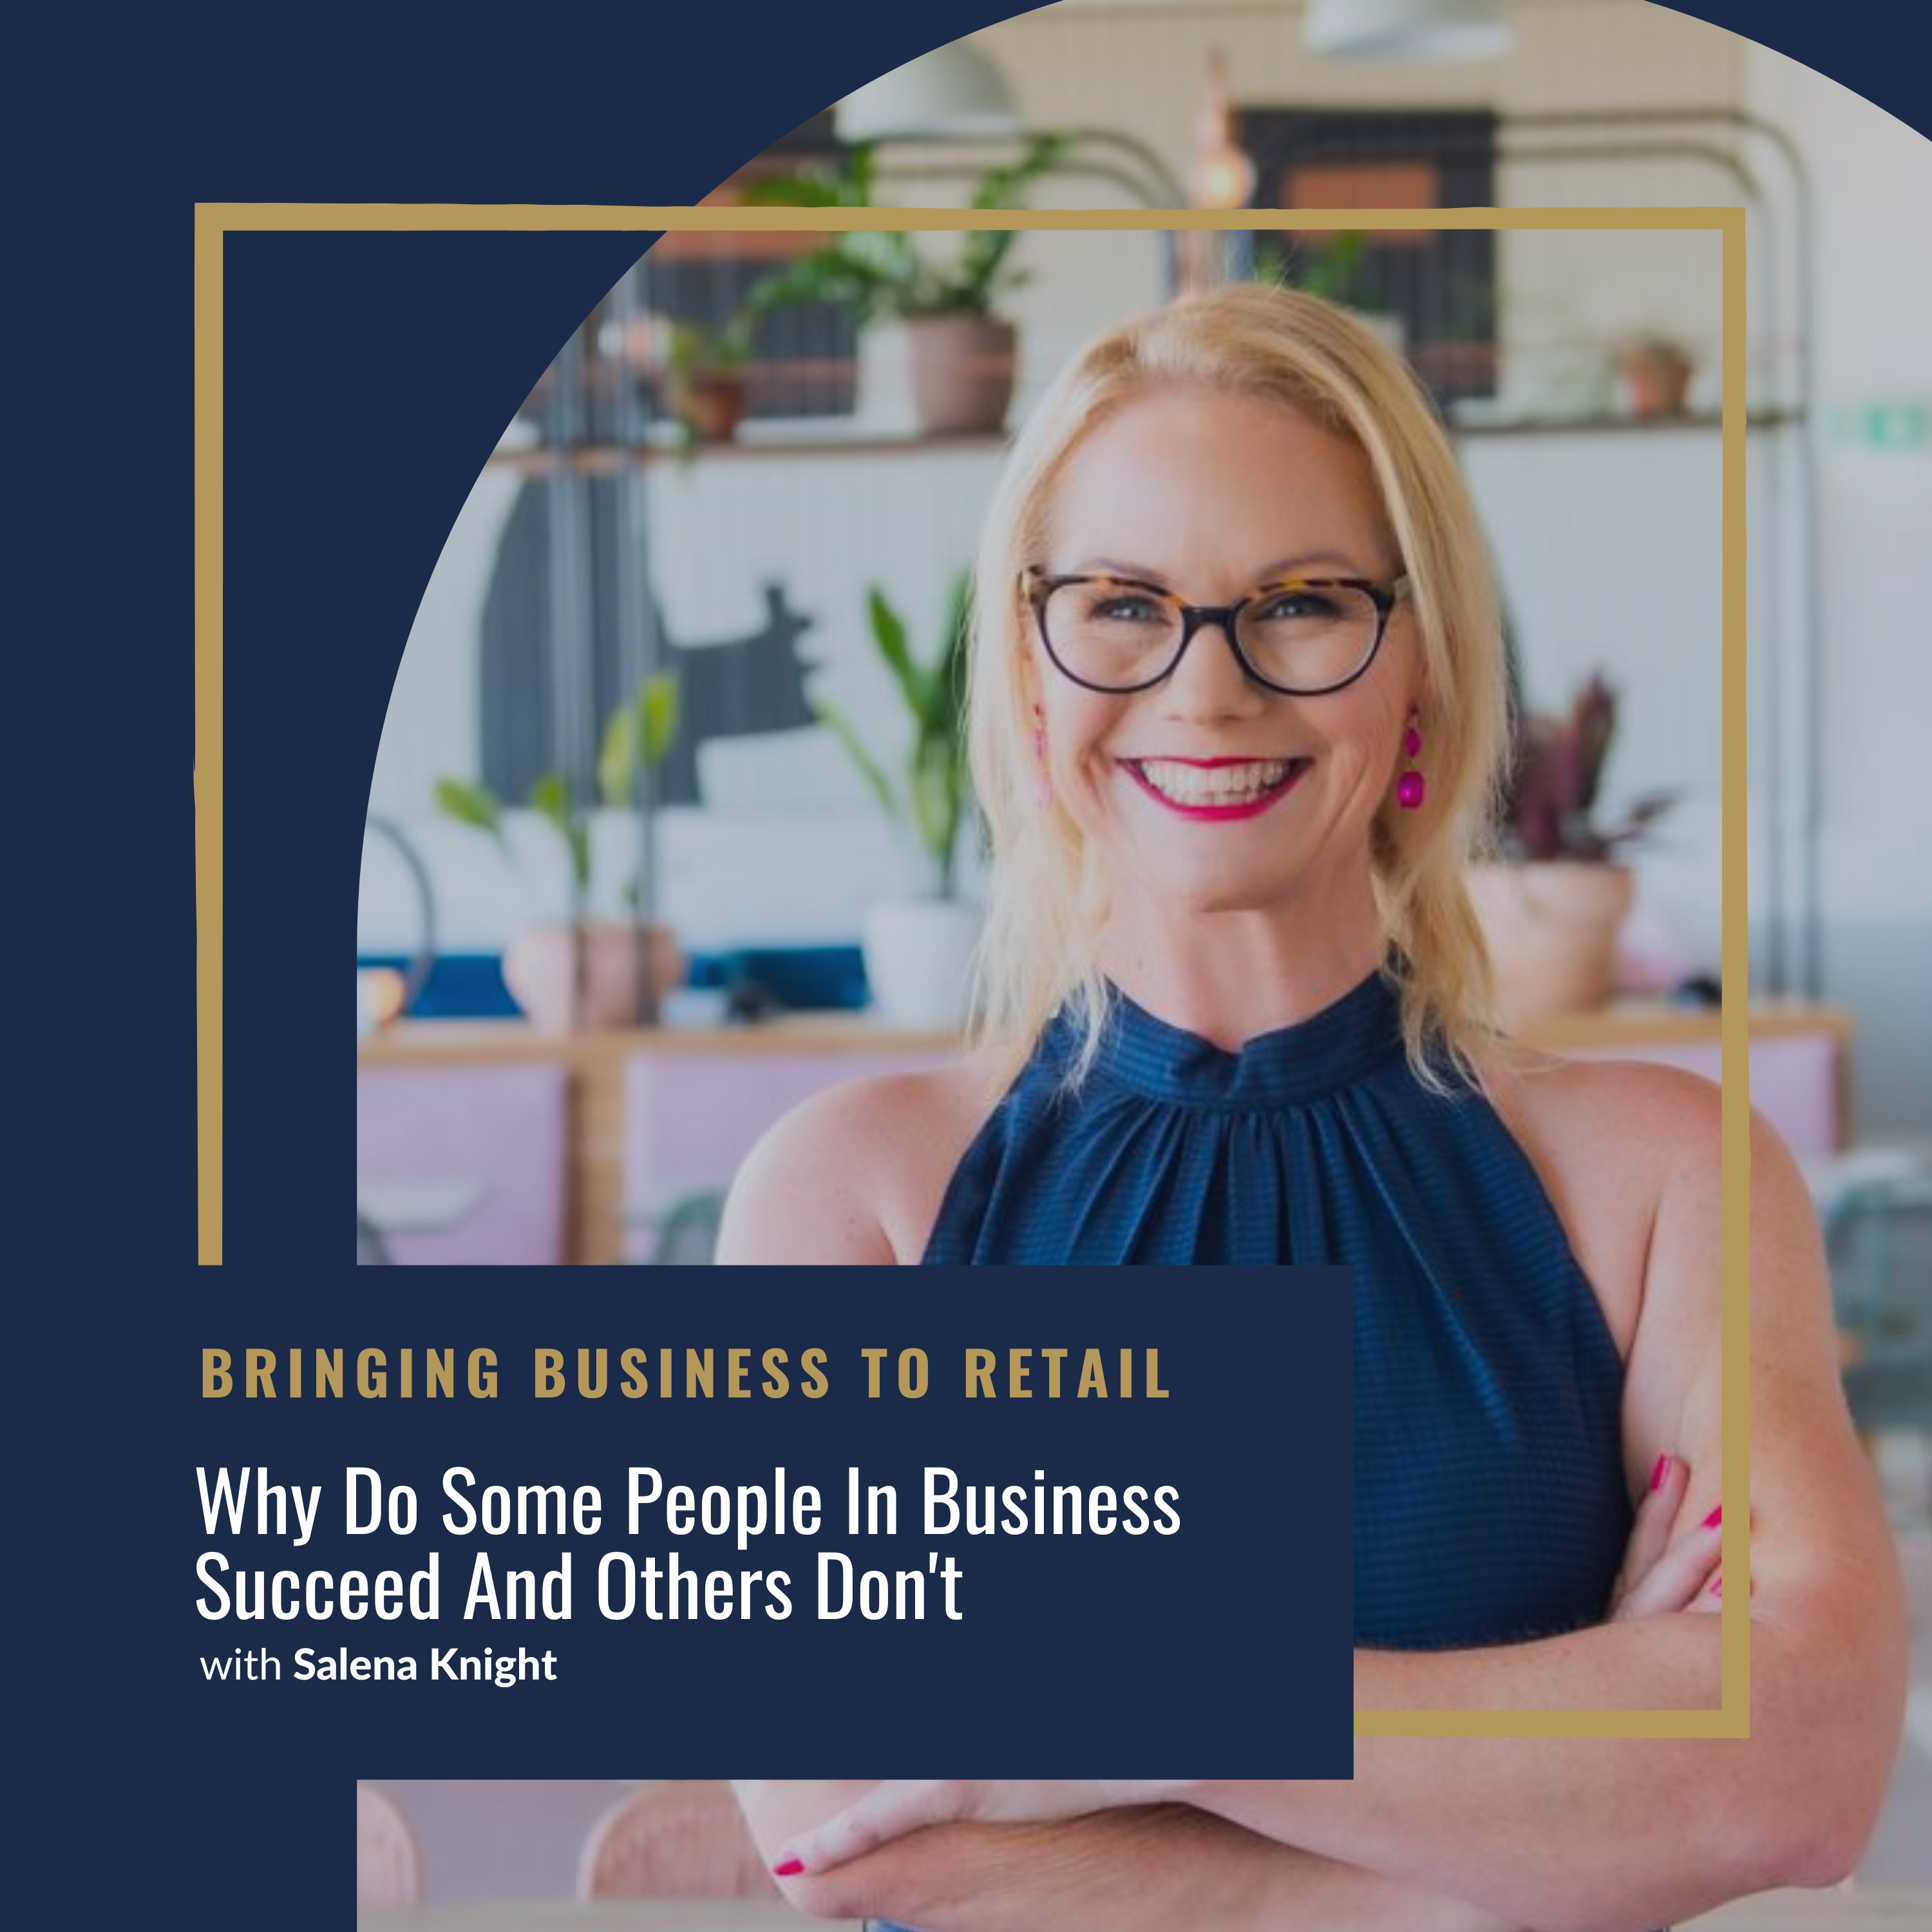 Why Do Some People In Business Succeed And Others Don’t_wordpress